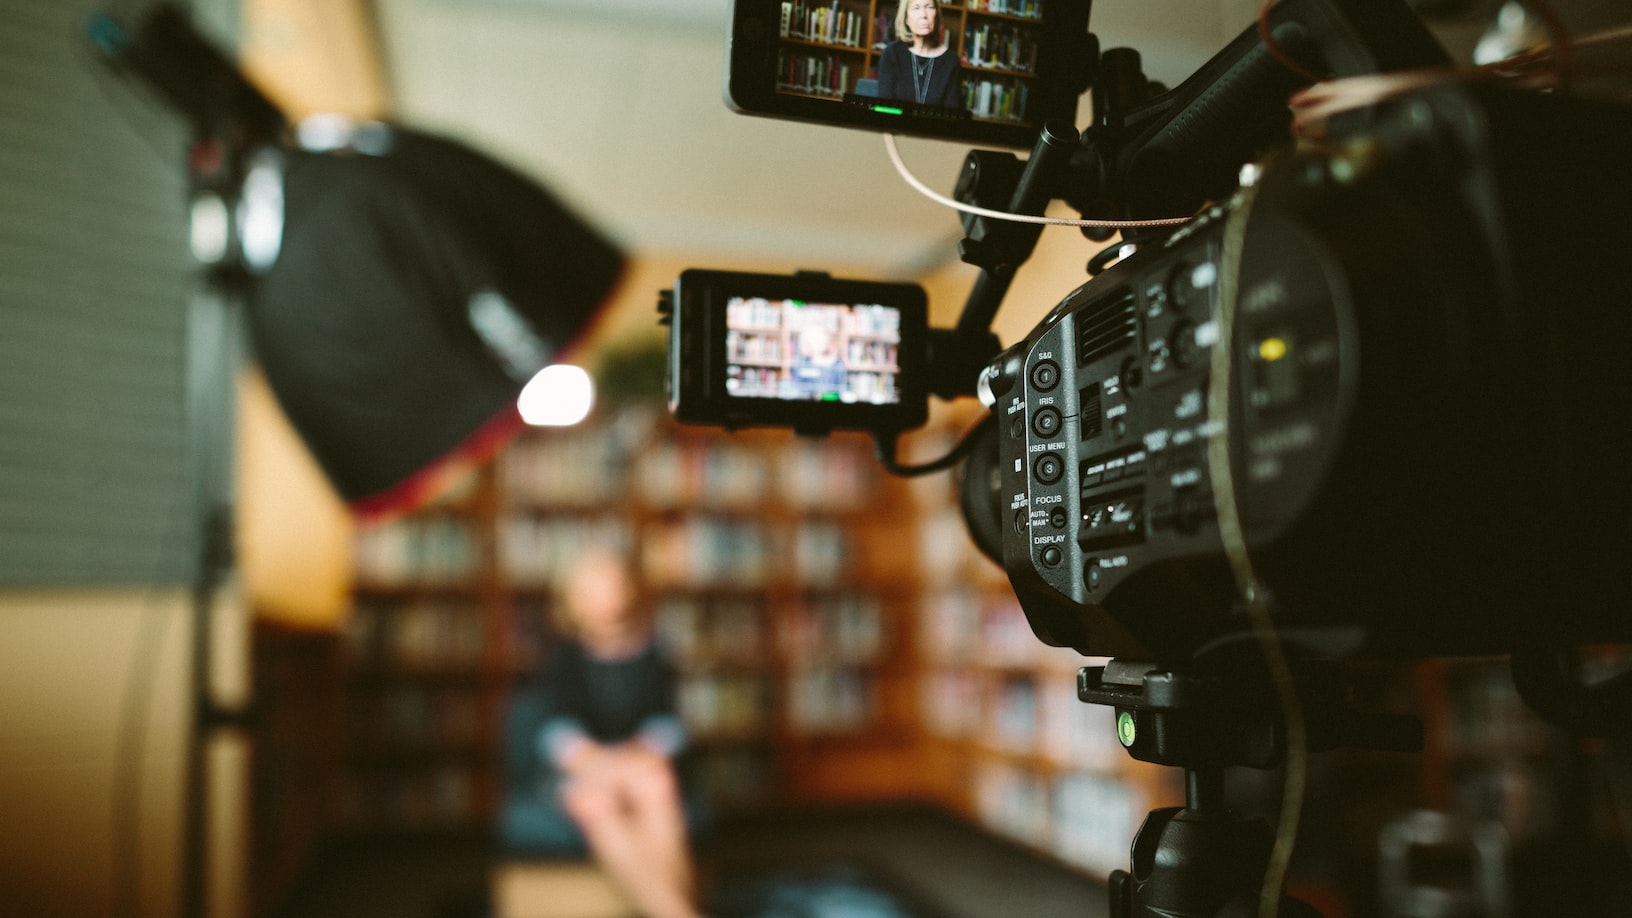 The importance of leveraging video content to build wider sales leads